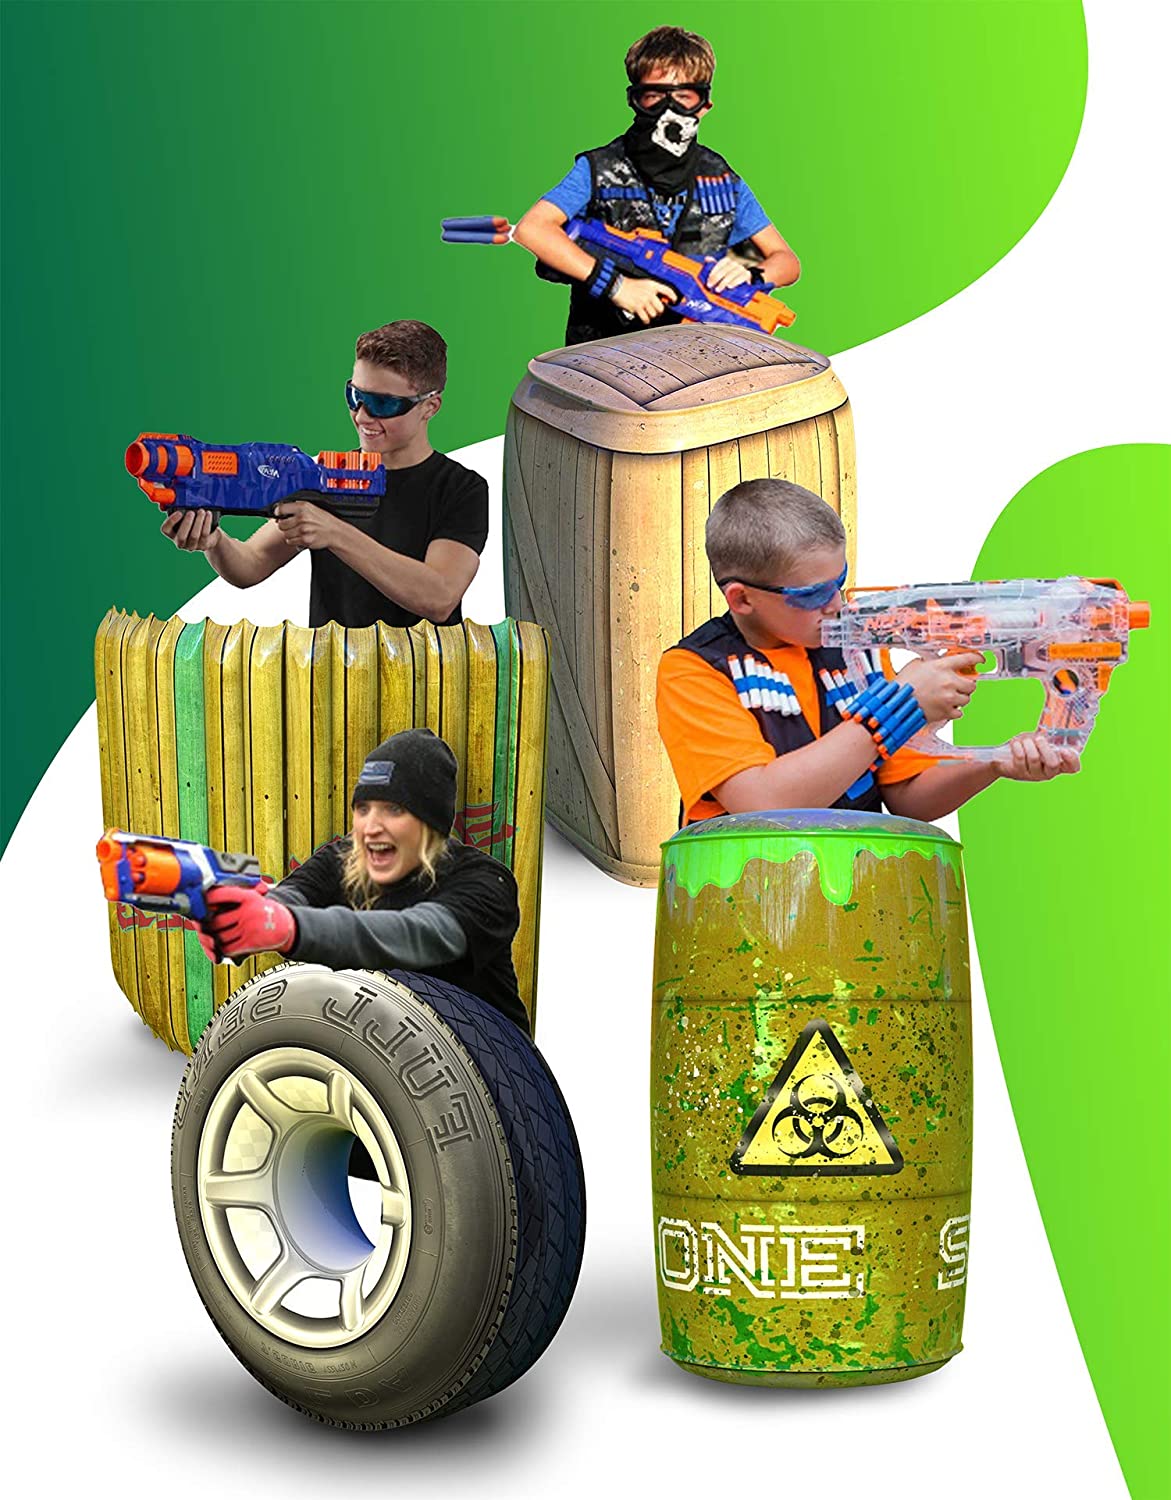 Skywin Inflatable Nerf Battle Obstacles, 4-Piece